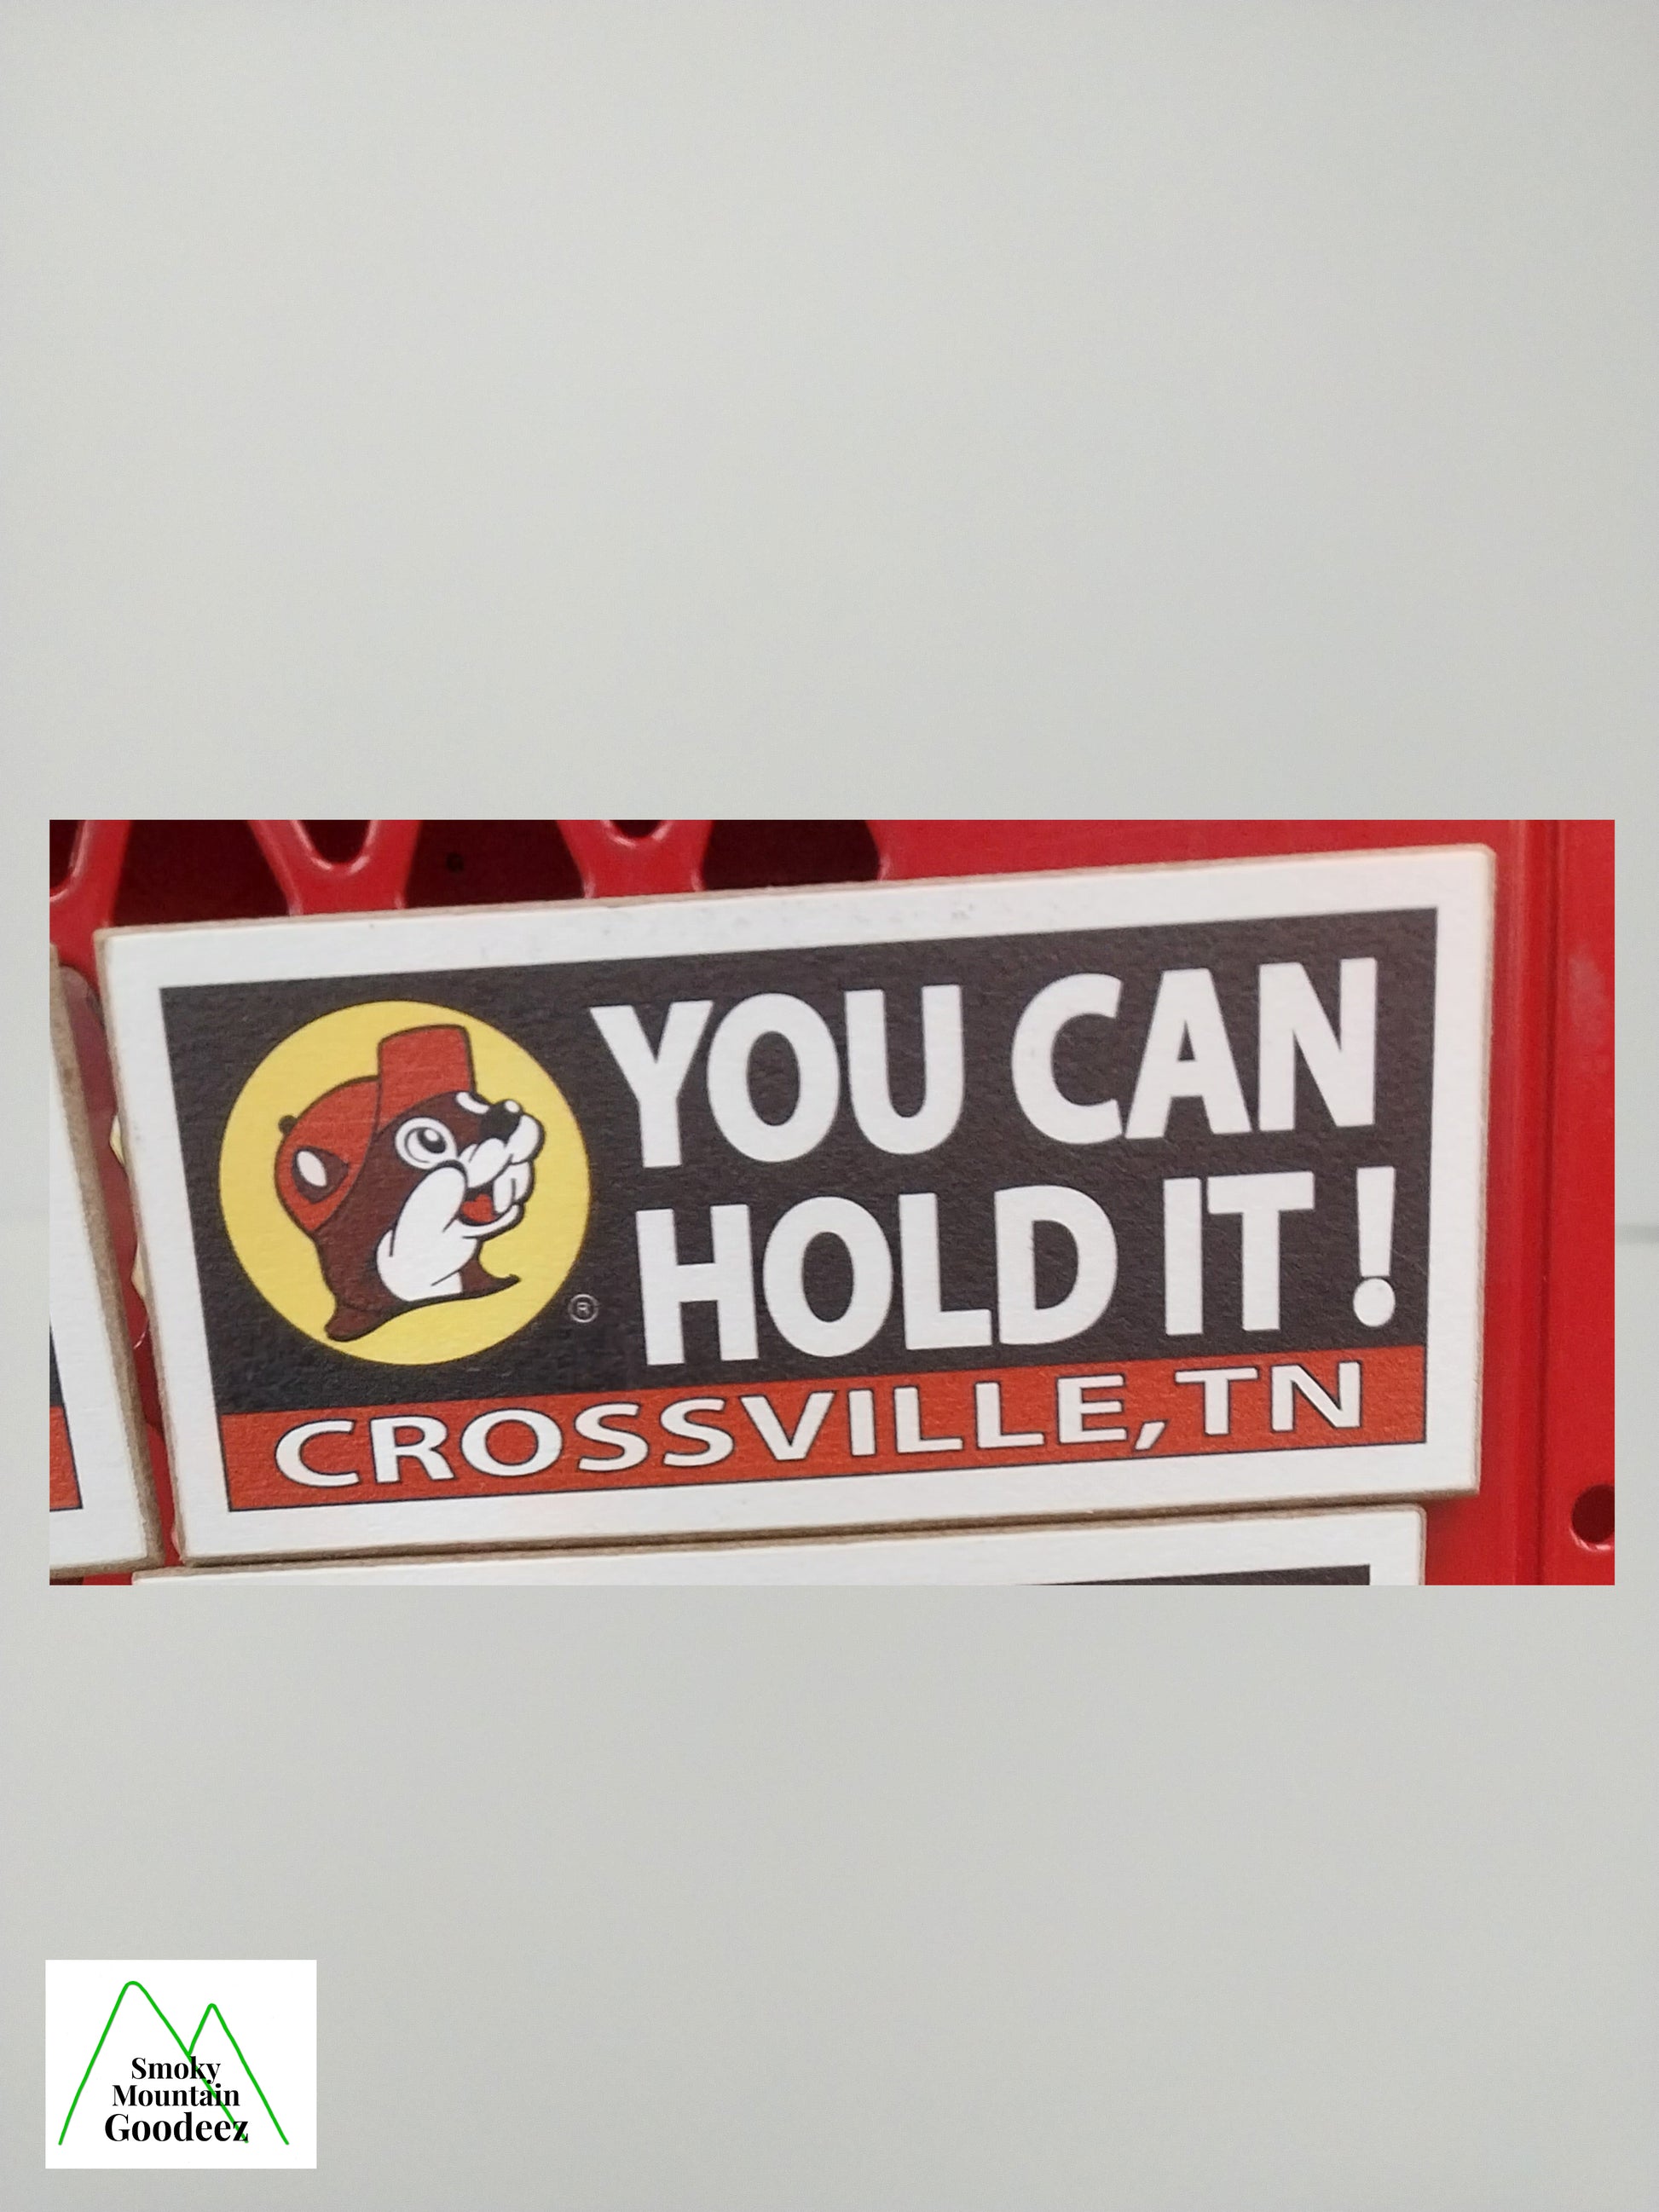 Buc-ee's Magnet Billboard Sign - You Can Hold It! Crossville, TN - 1 of 6  Varieties